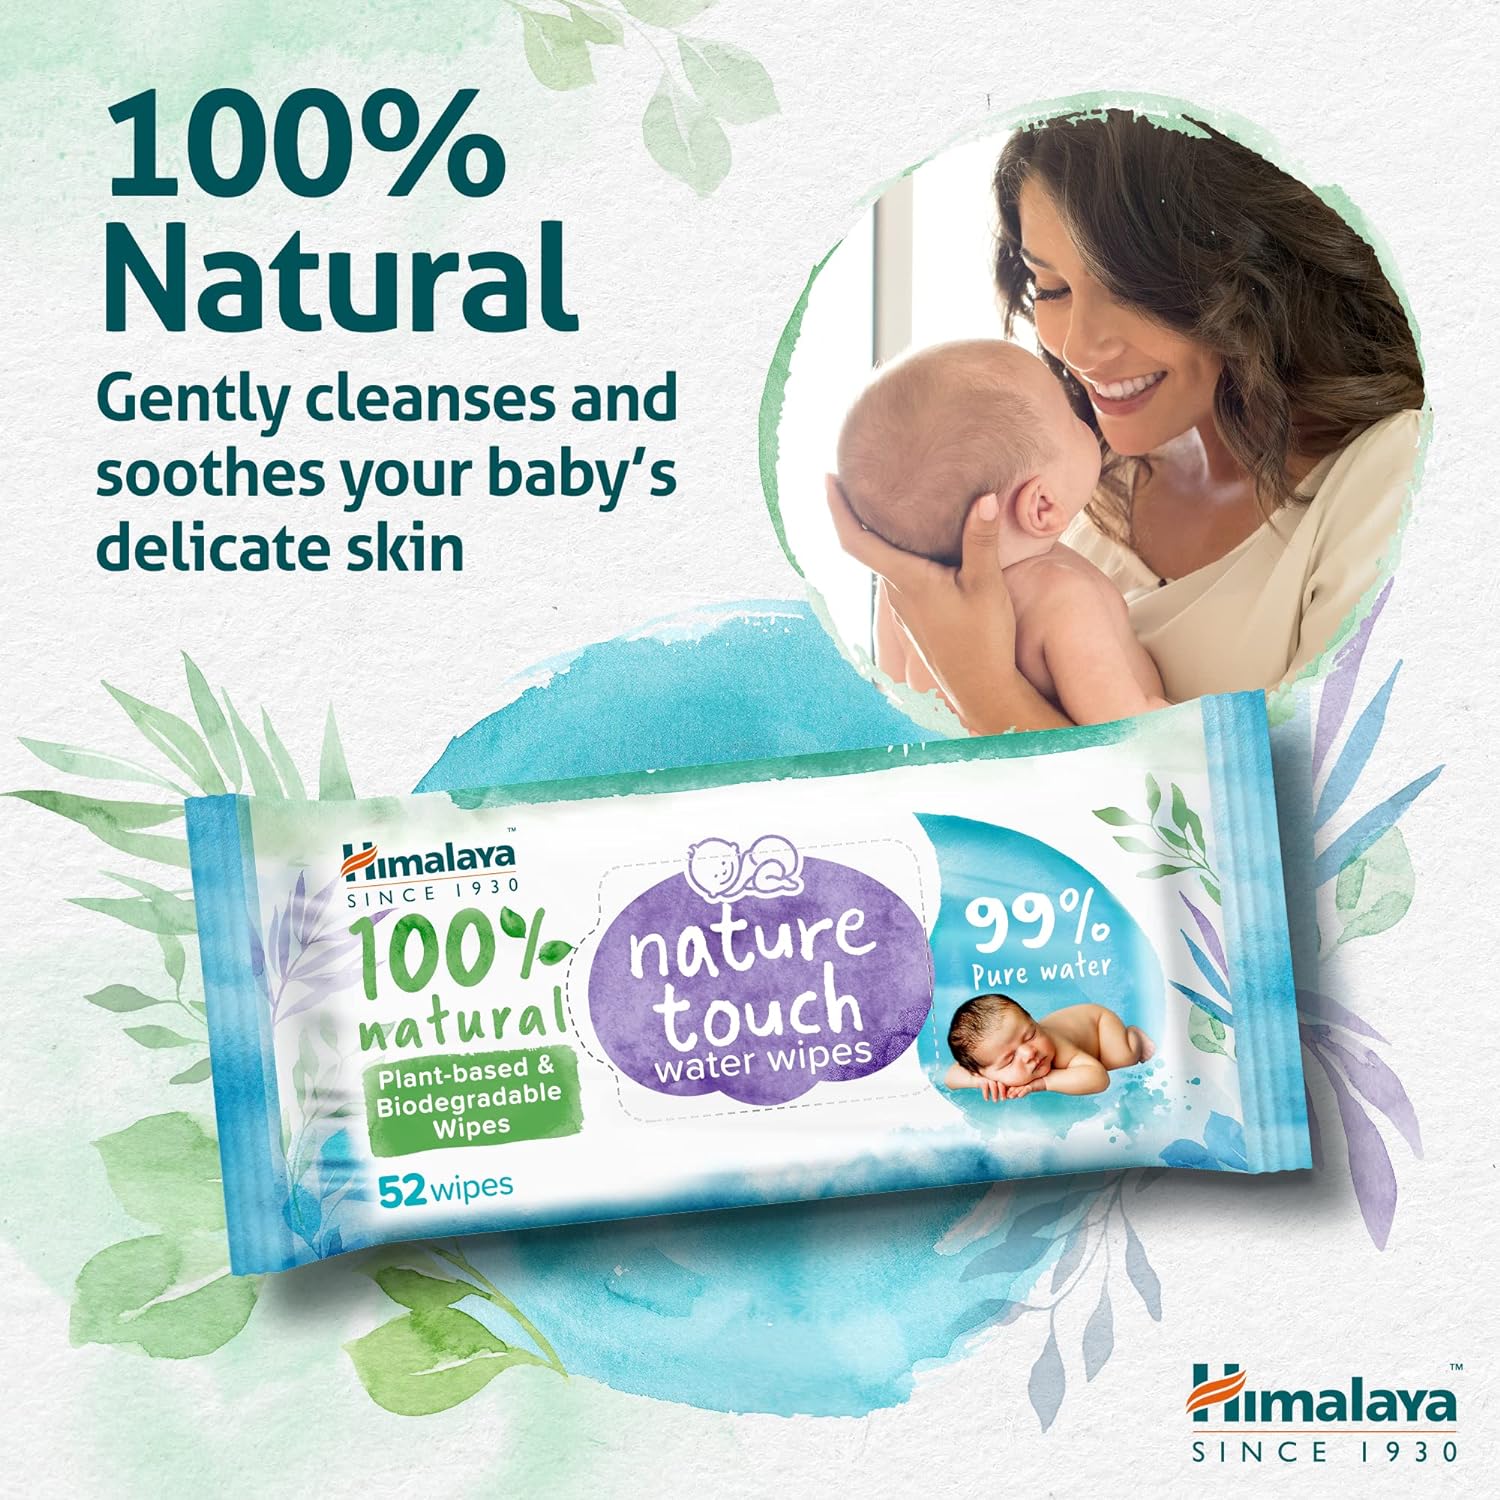 Himalaya Nature Touch Water Baby Wipes Pack of 4 Pouches x 52 Wipes: 208 Extra Thick and Wide Wipes